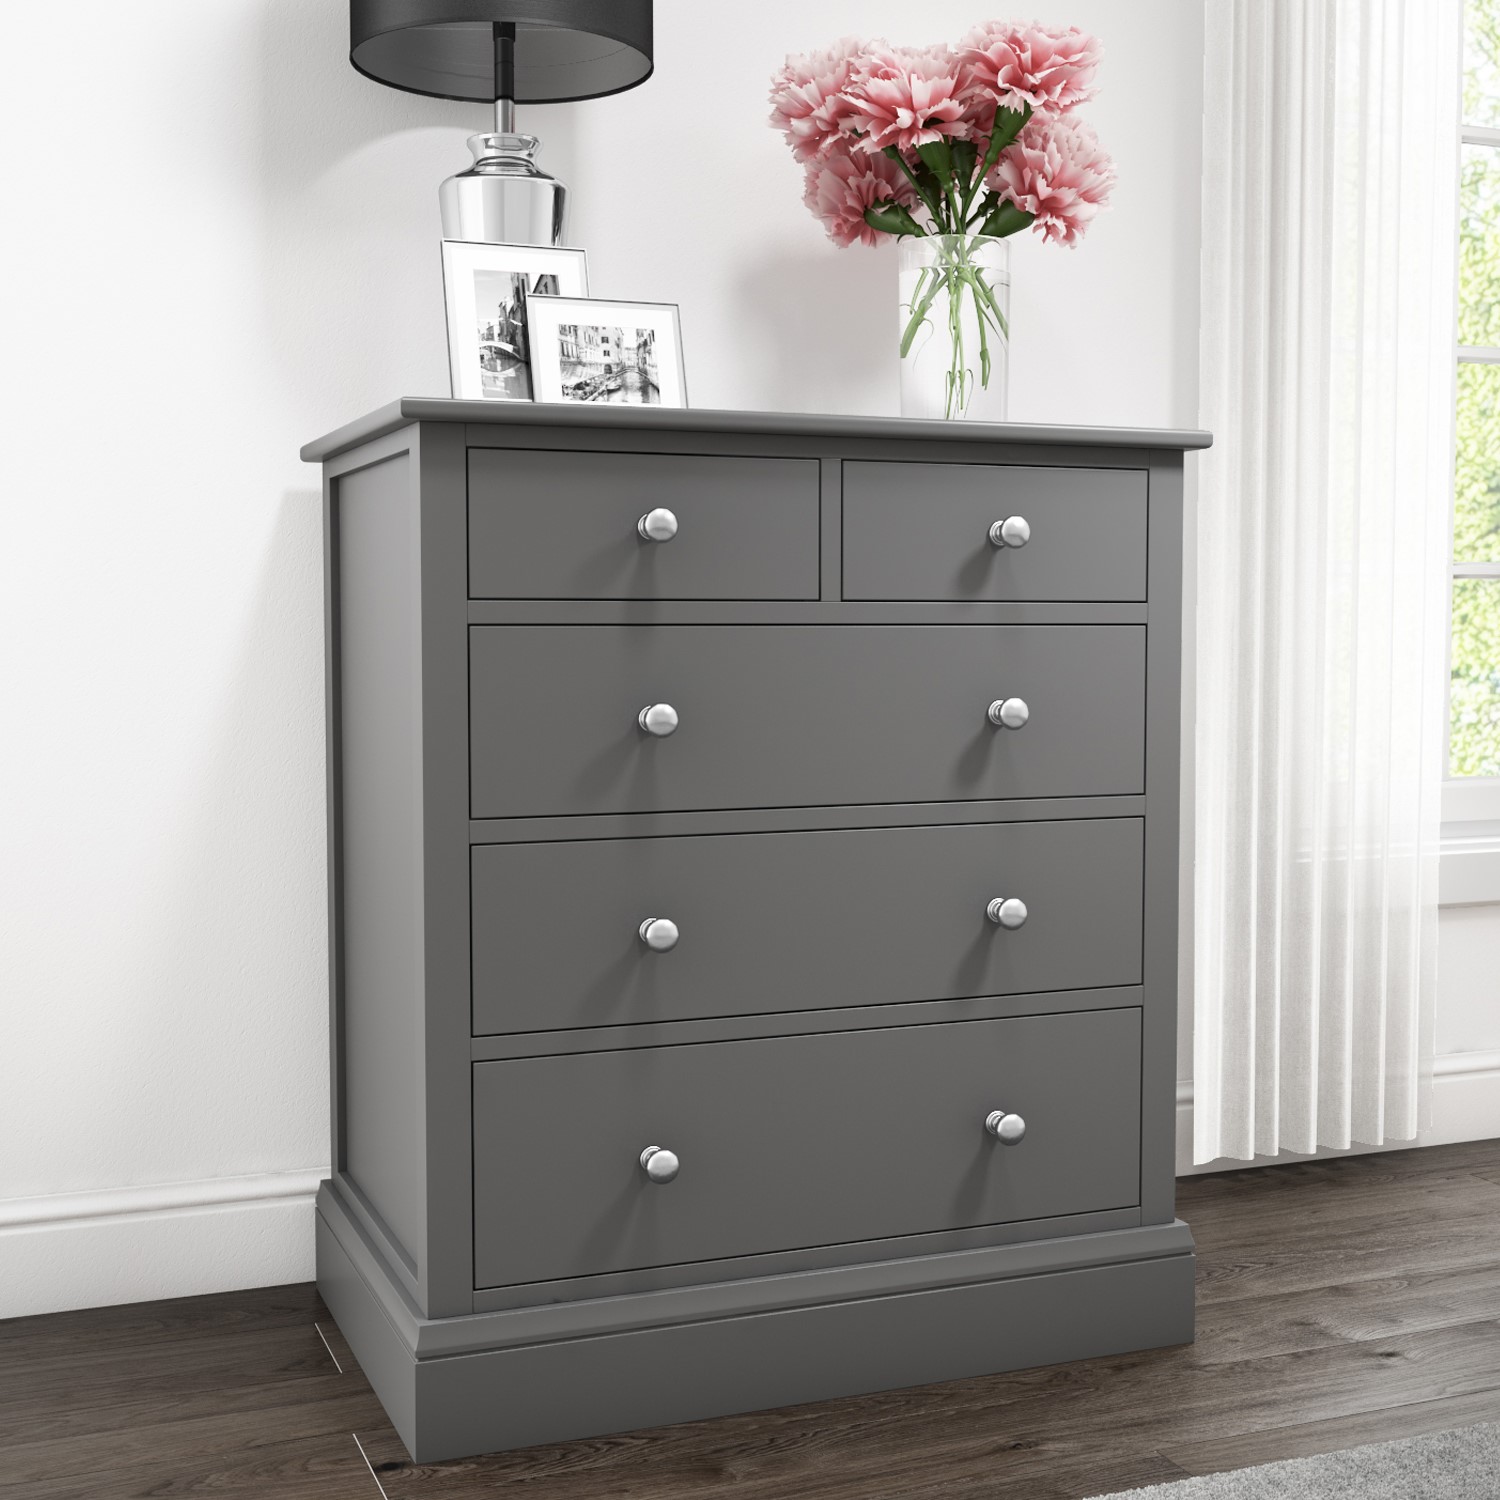 Grey Chest Of Drawers 23 Drawer Solid Wood Bedroom Storage Unit